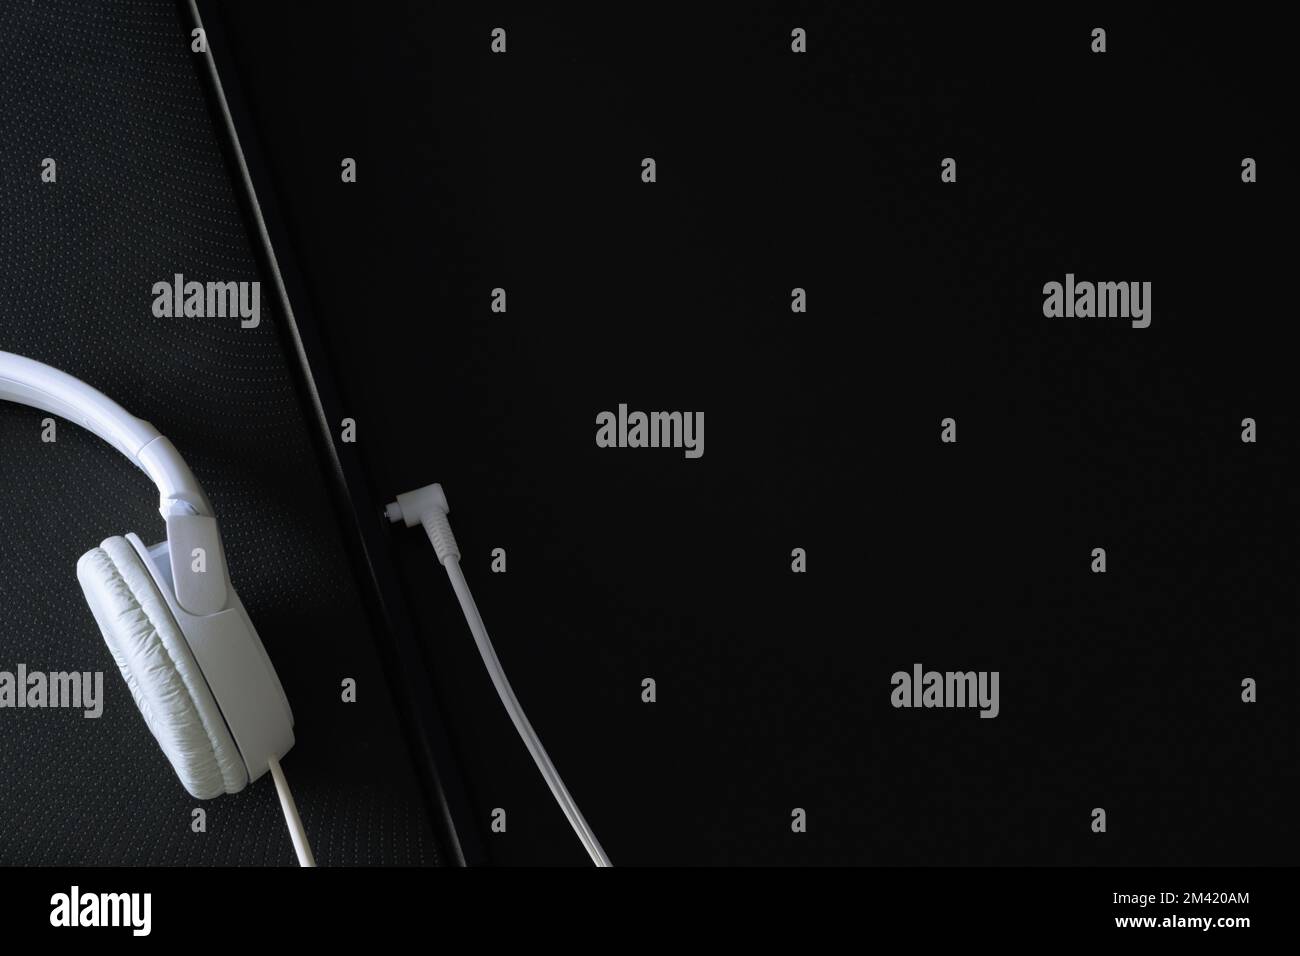 White headphones and part of notebook on a black background. Stock Photo